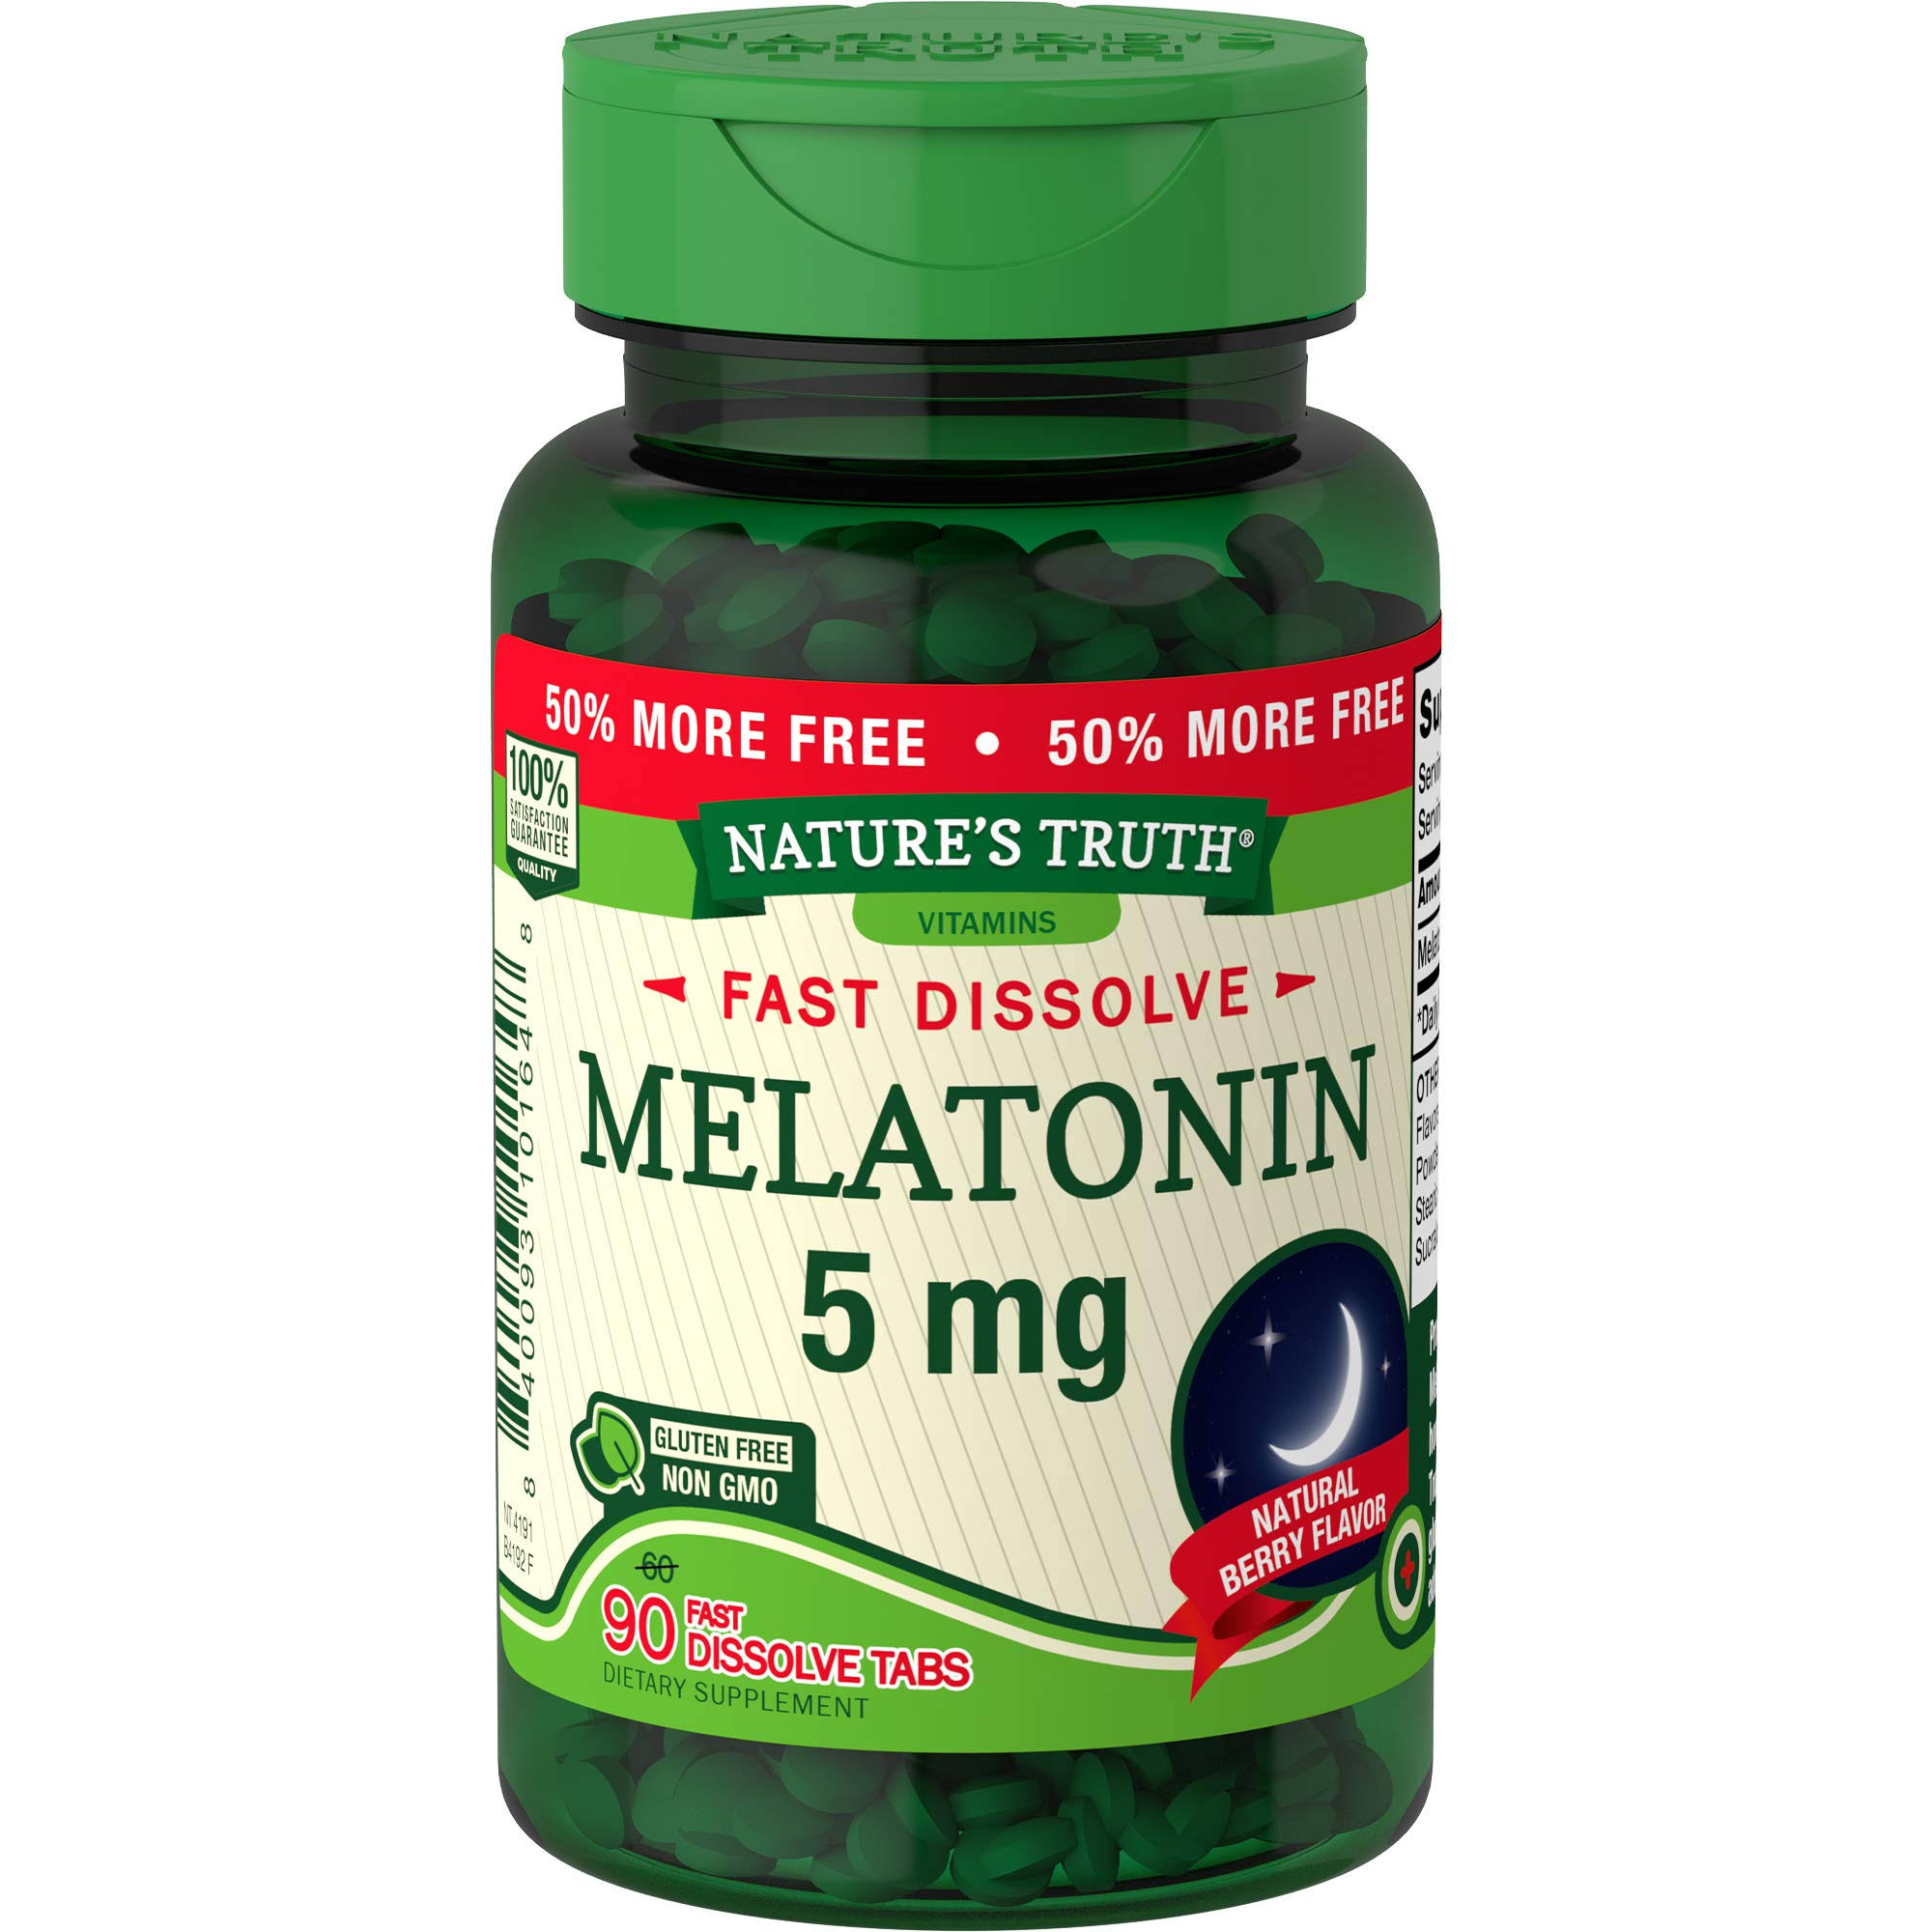 Nature's Truth Melatonin Tablets - Natural Berry, x90